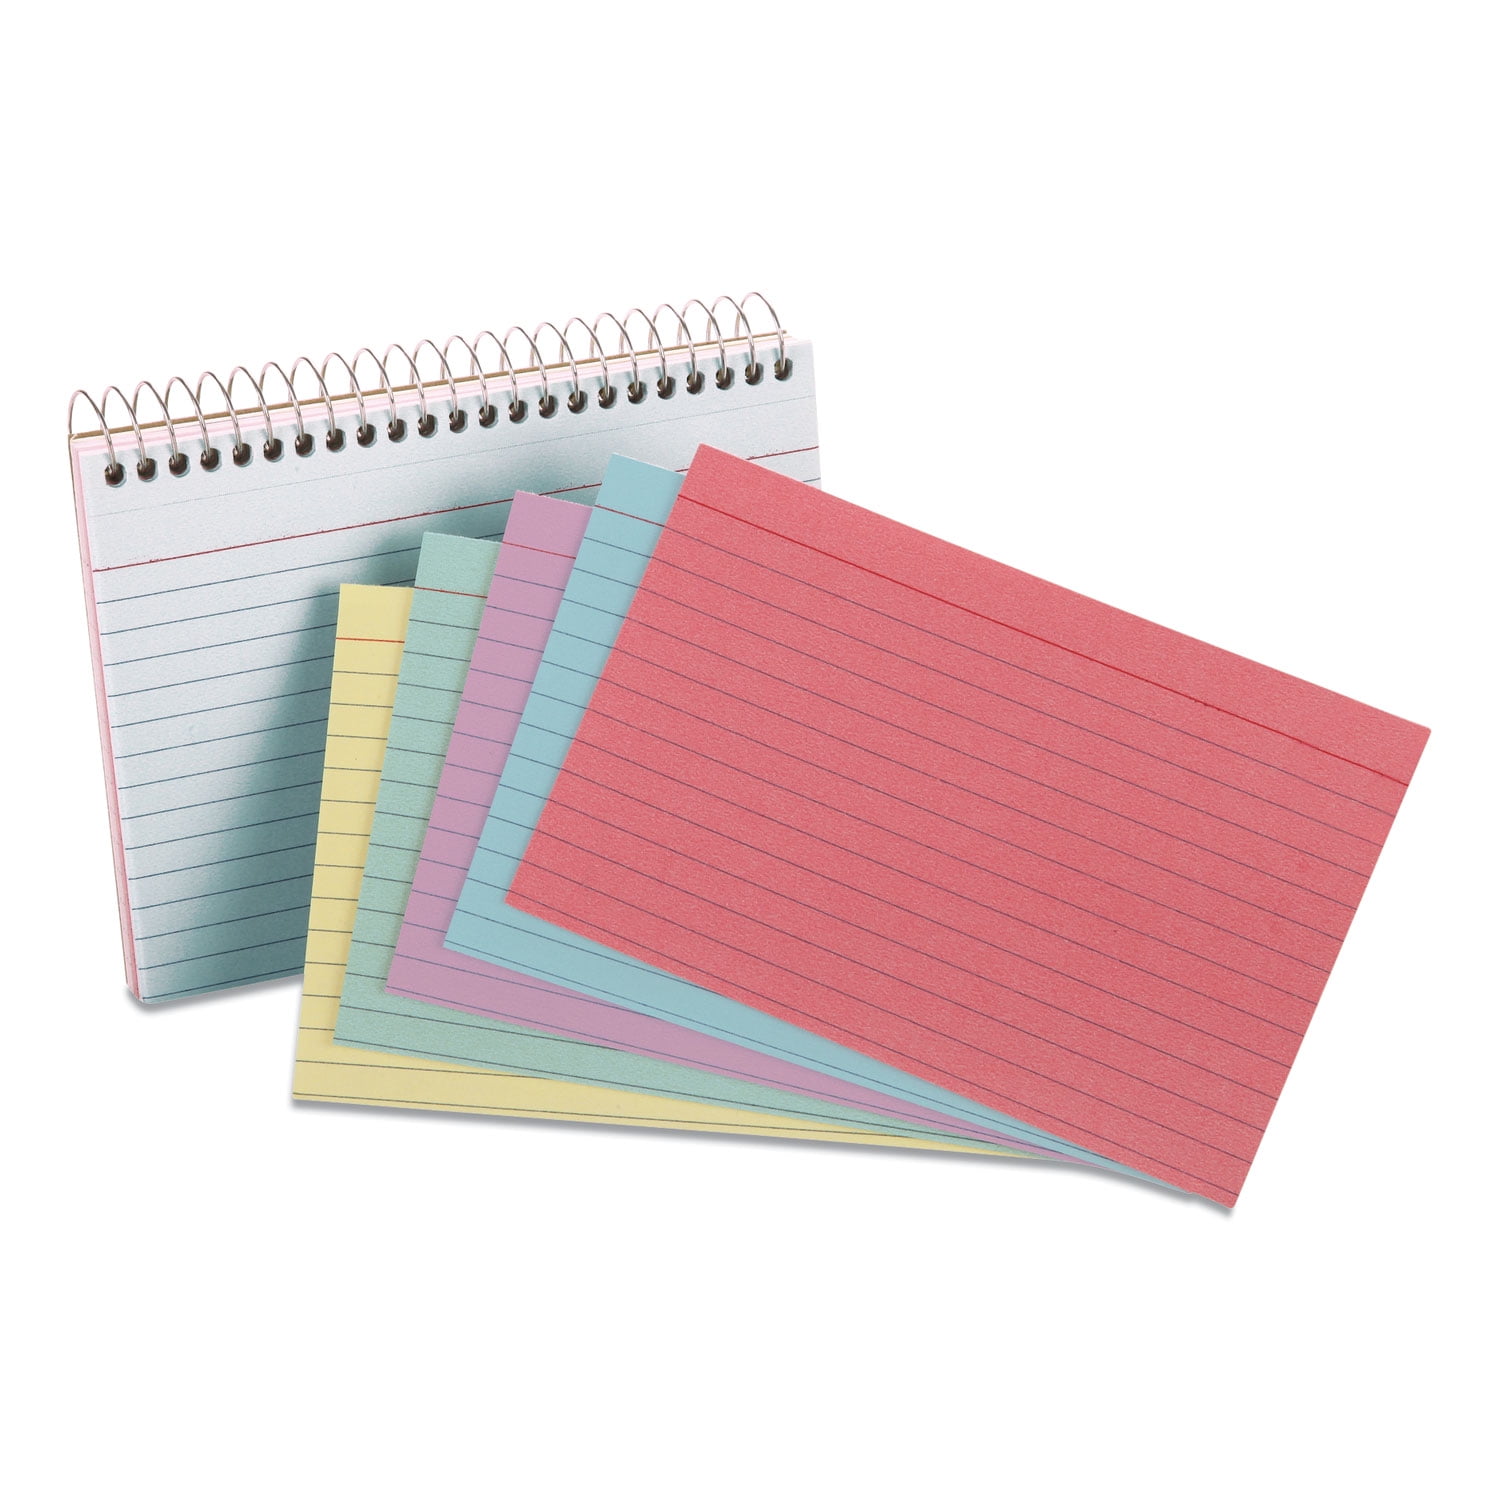 Leelosp 300 Pcs Colored Ruled Index Cards with 6 Rings Neon Color Study  Flash Cards Single Hole Punched Lined Flashcards Studying Notecards One  Side